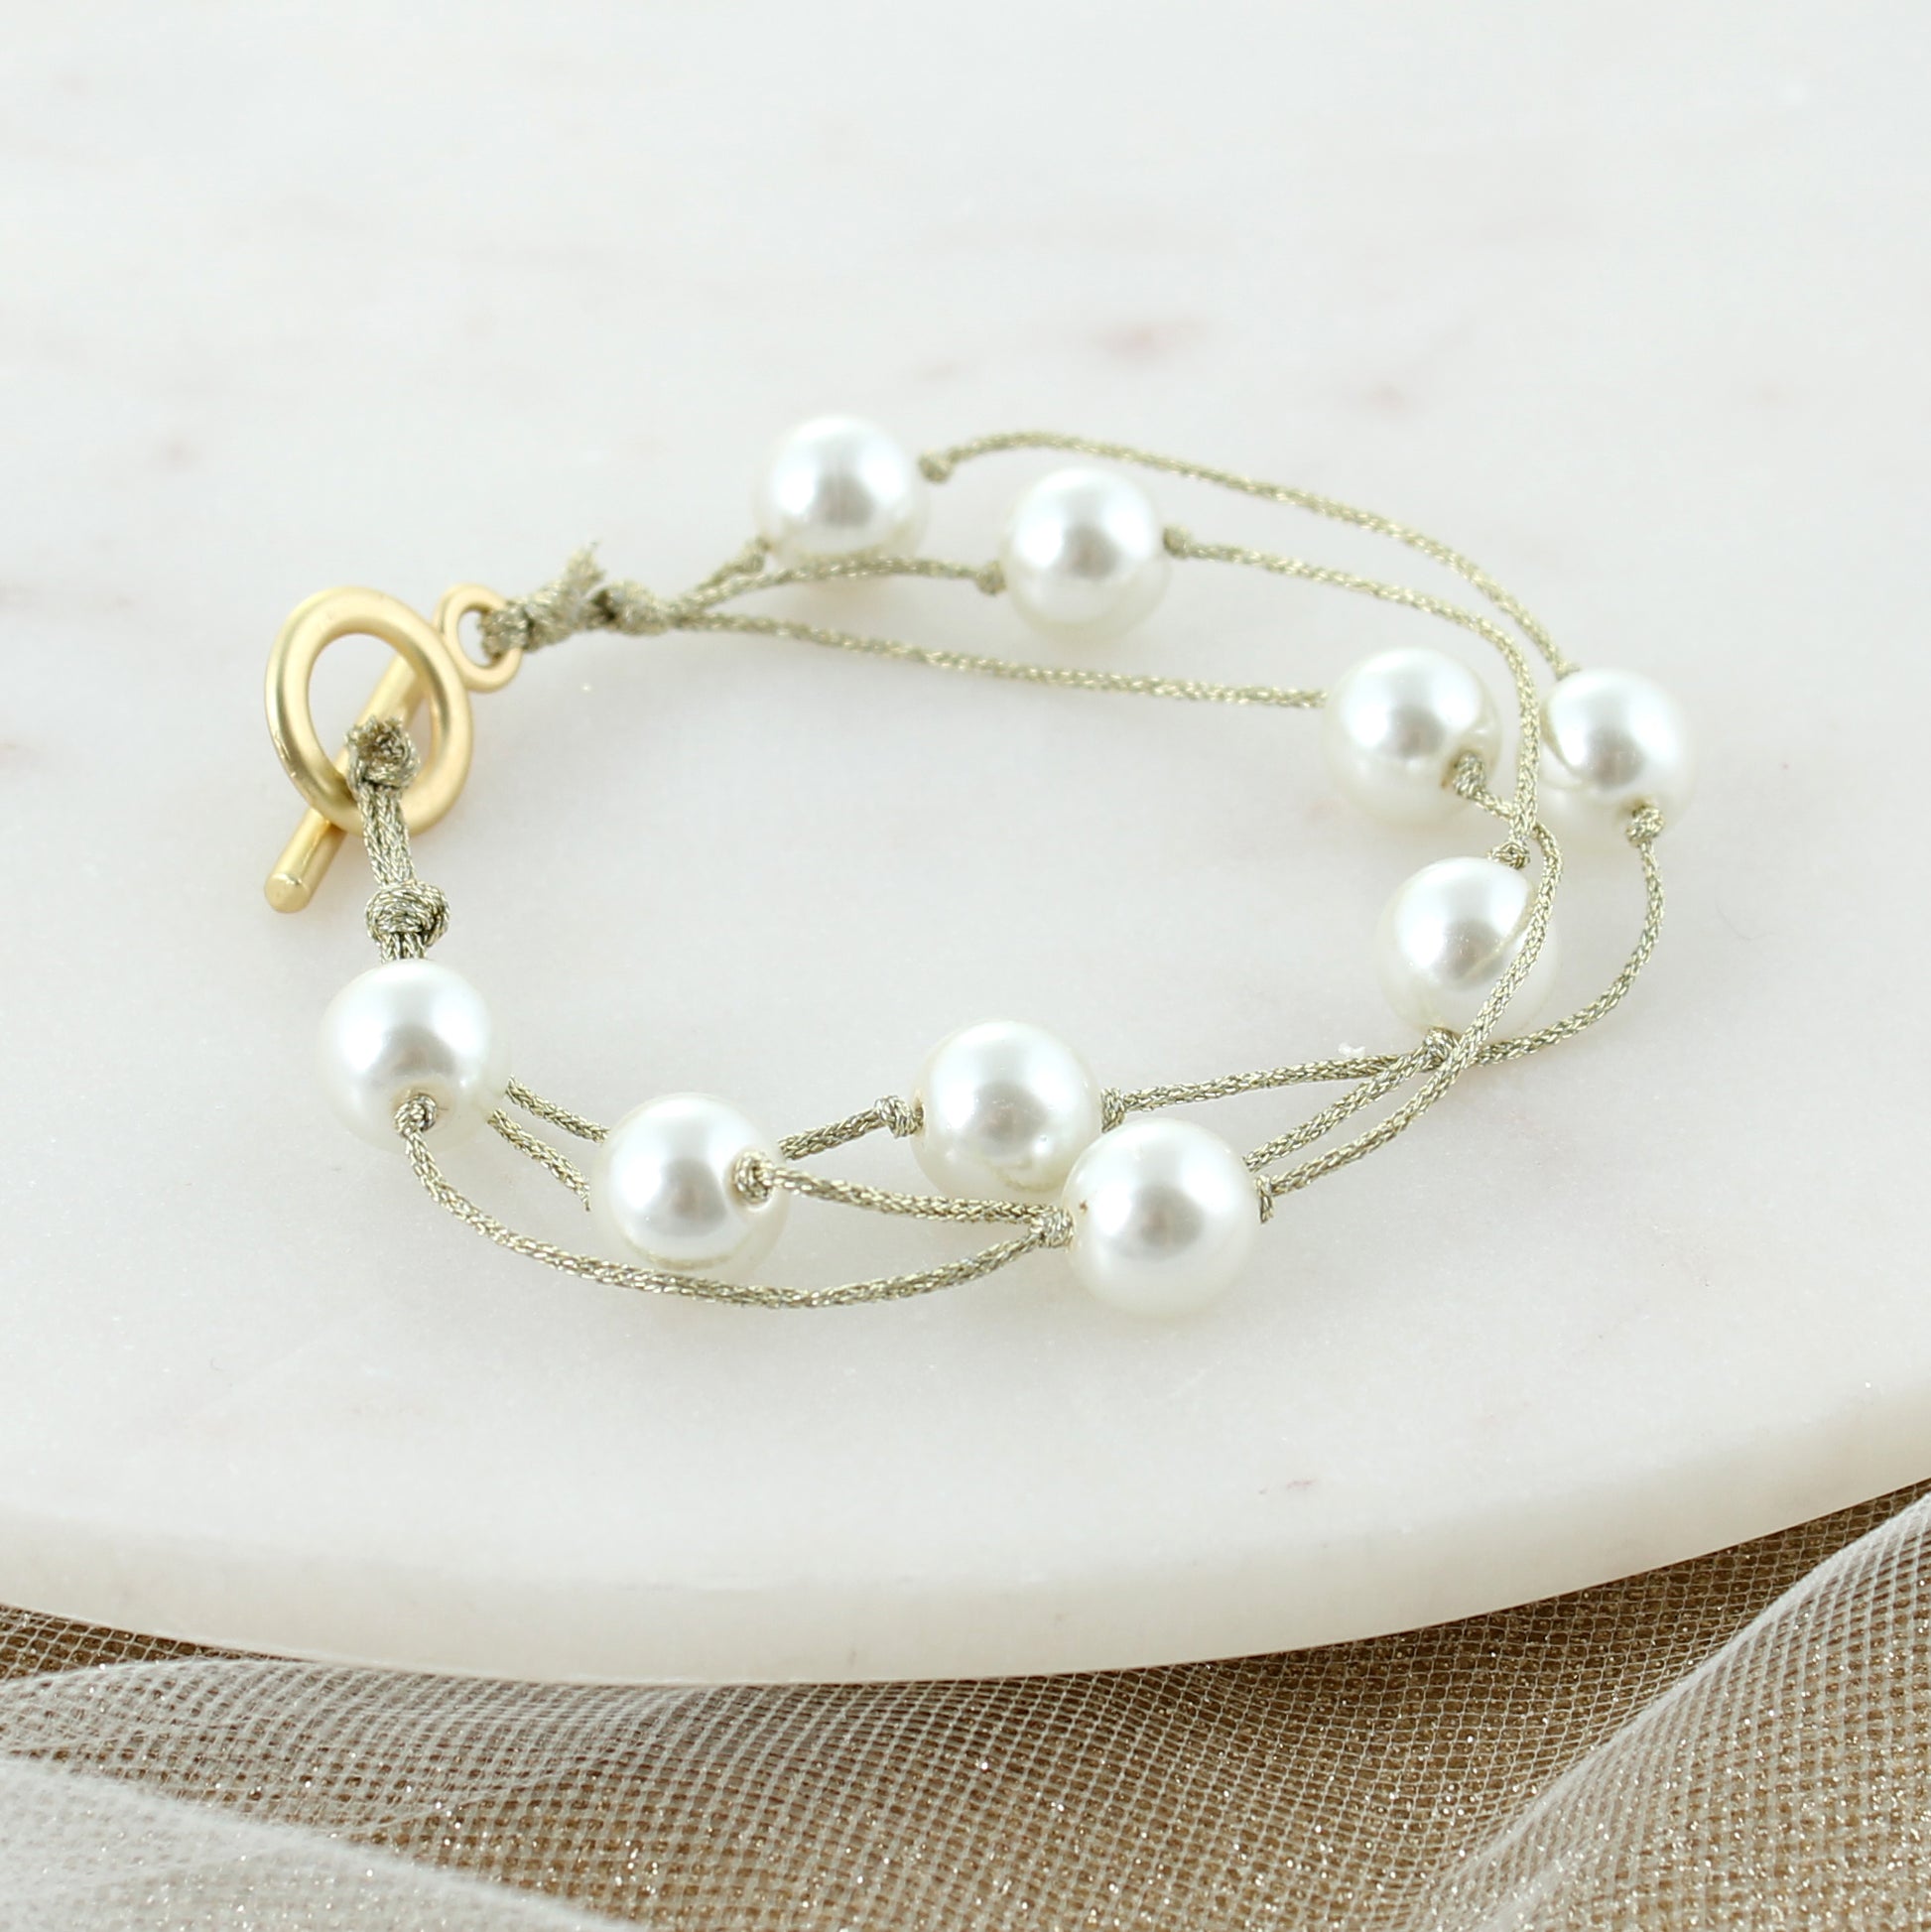 Gold & Pearl Knotted Toggle Bracelet